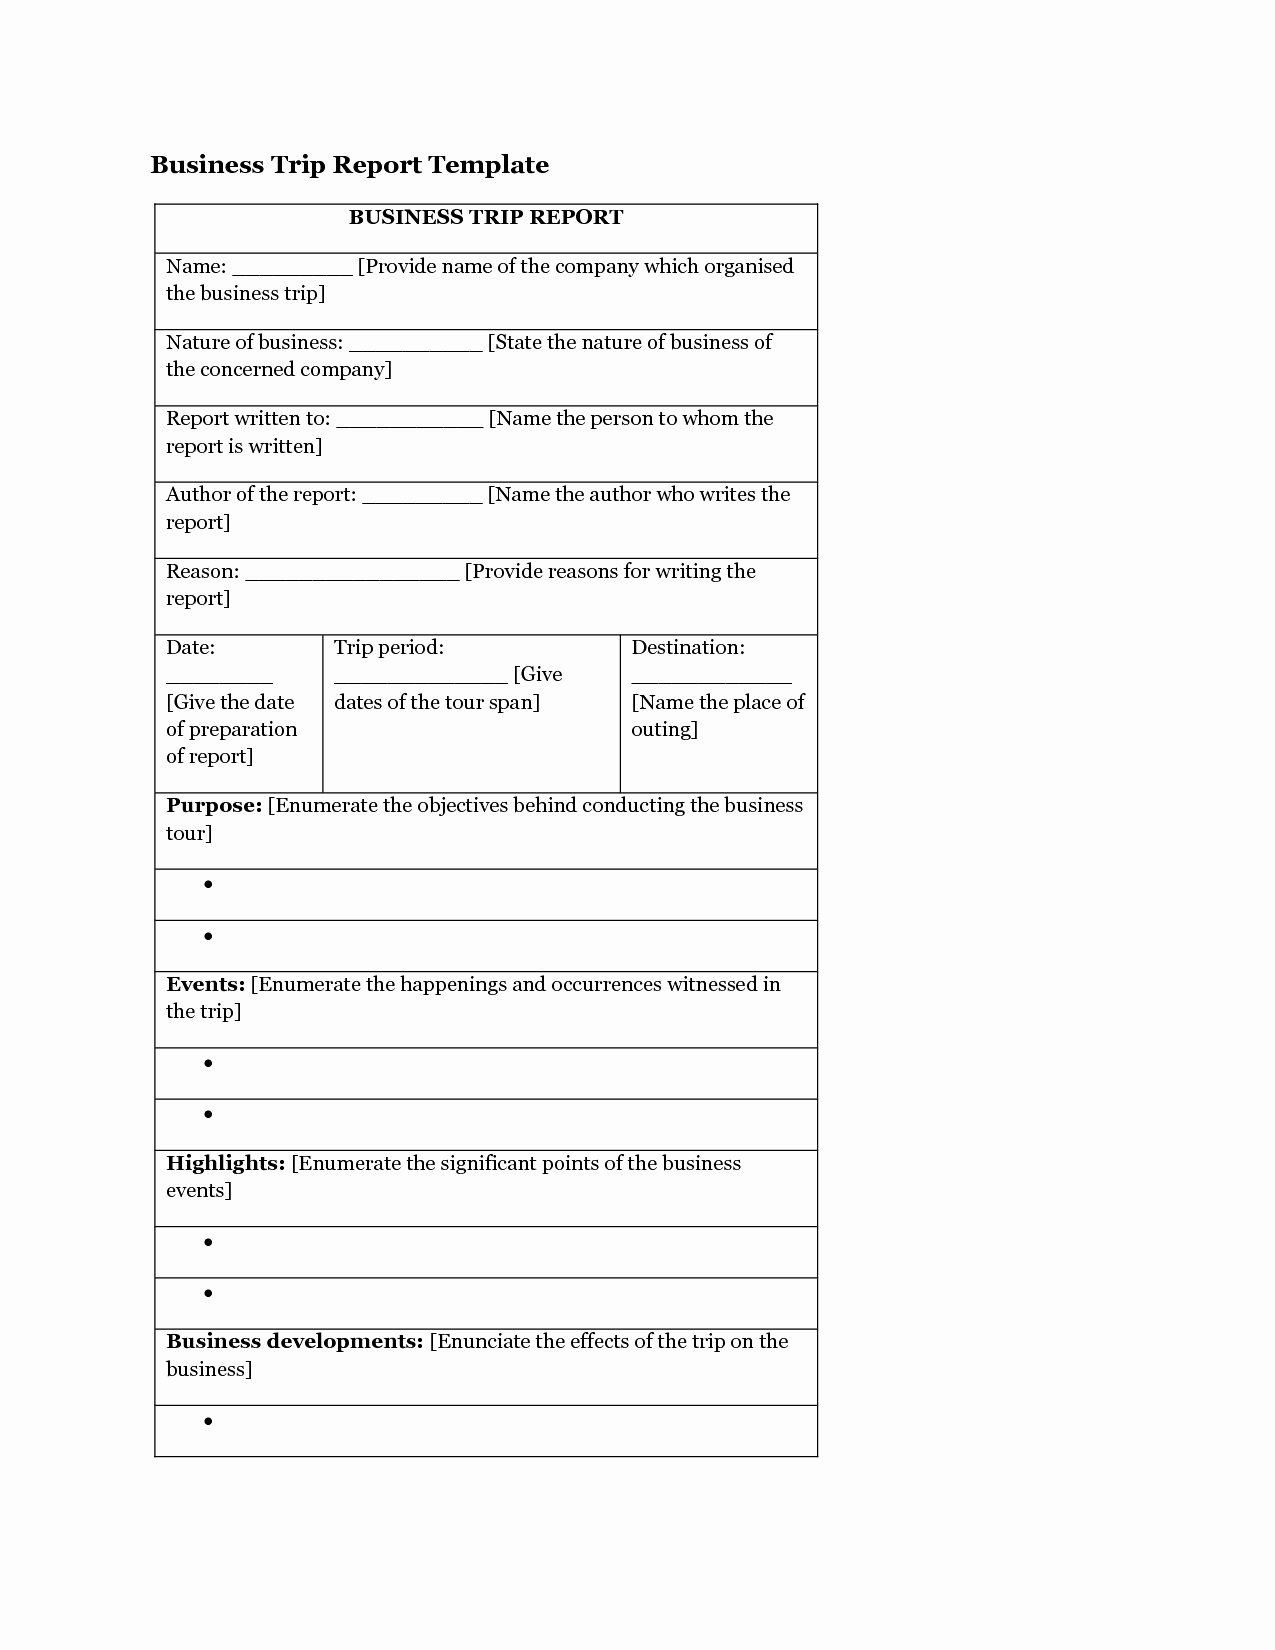 Business Trip Report Template Unique 12 Business Trip Report Examples Pdf Word Apple